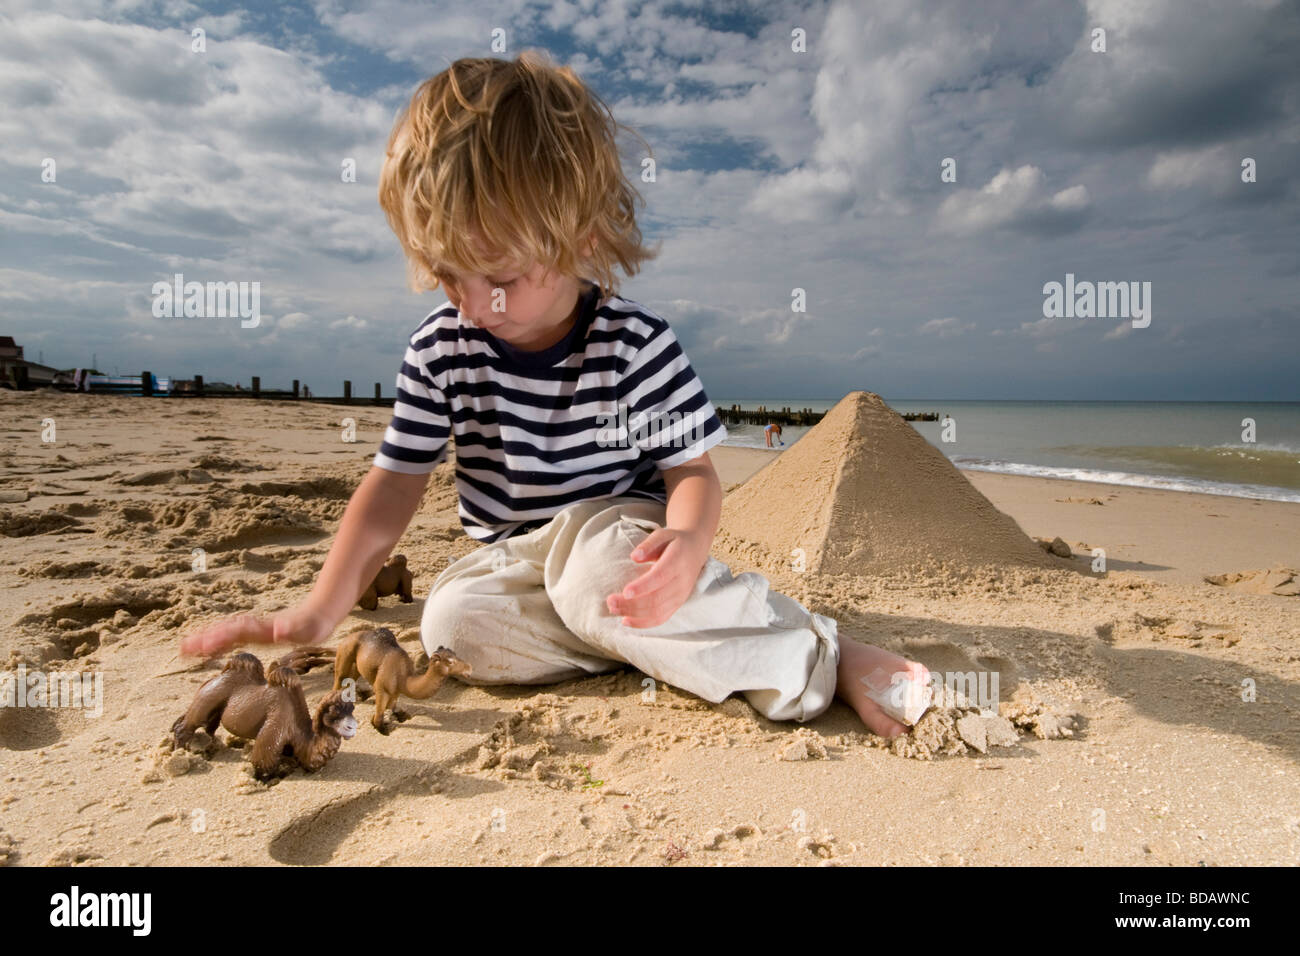 Small boy plays with toy camels at the seaside Stock Photo